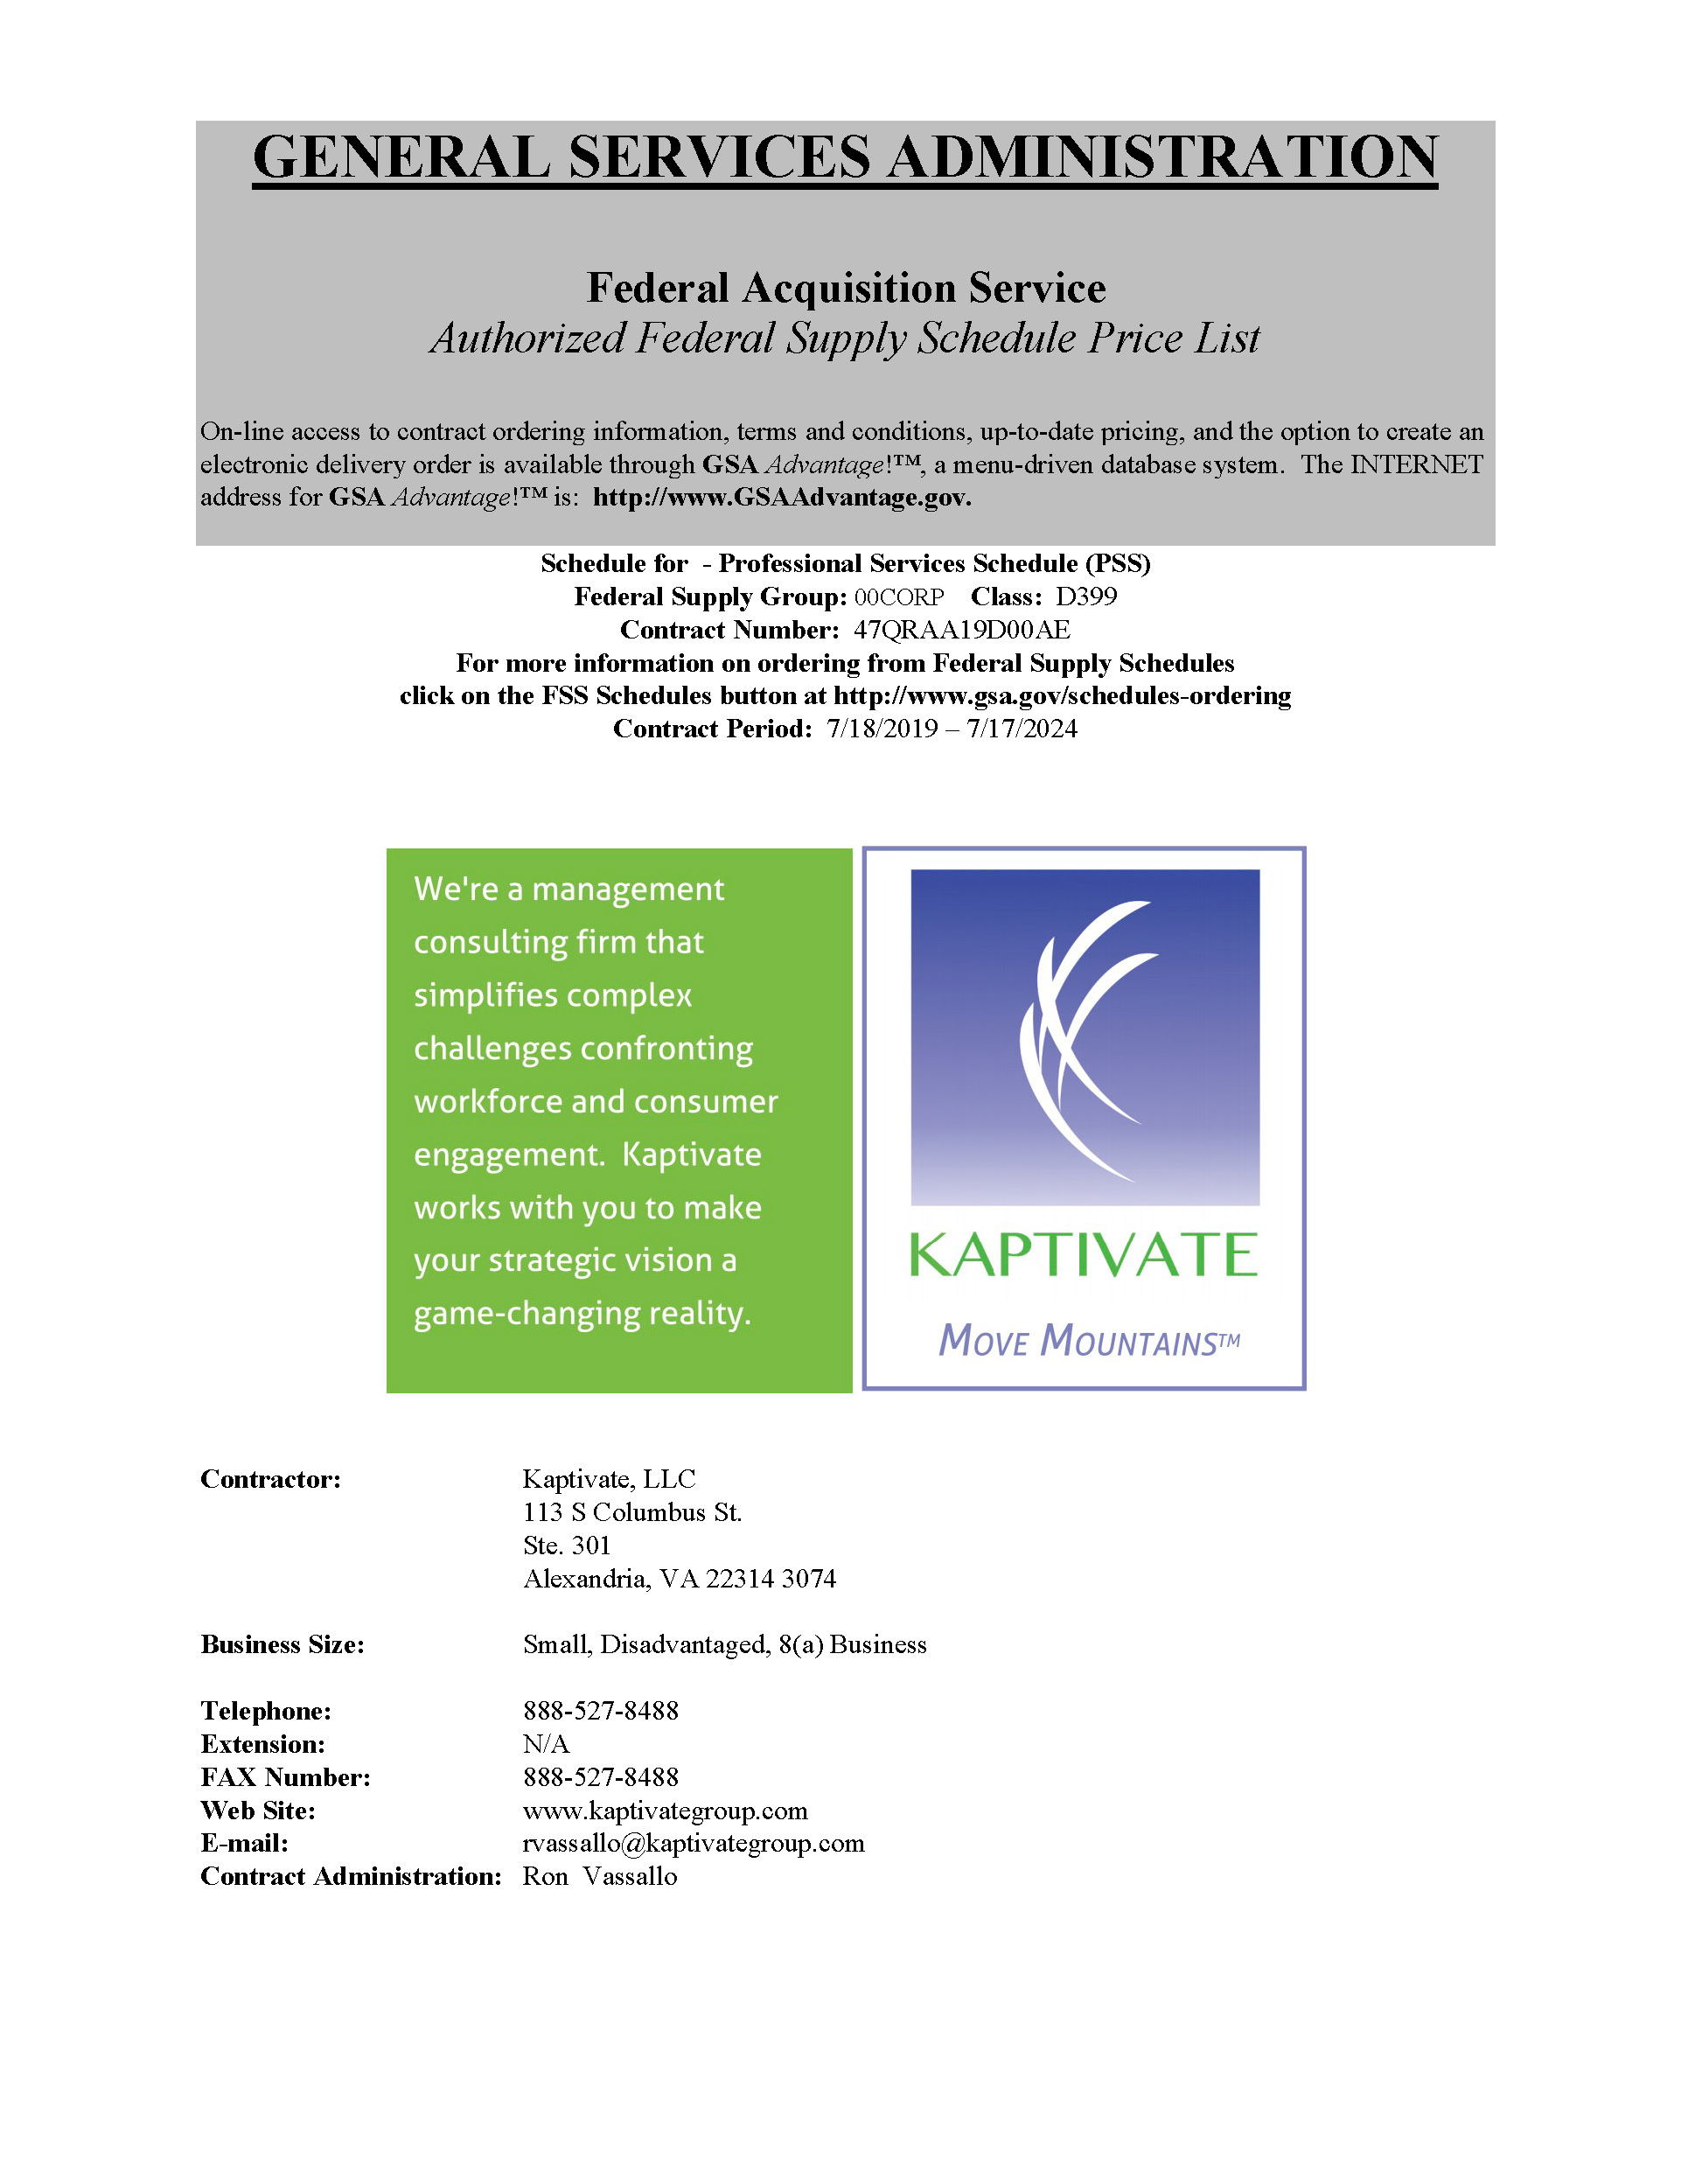 Kaptivate LLC_Authorized Federal Supply Schedule Price List_Page_01